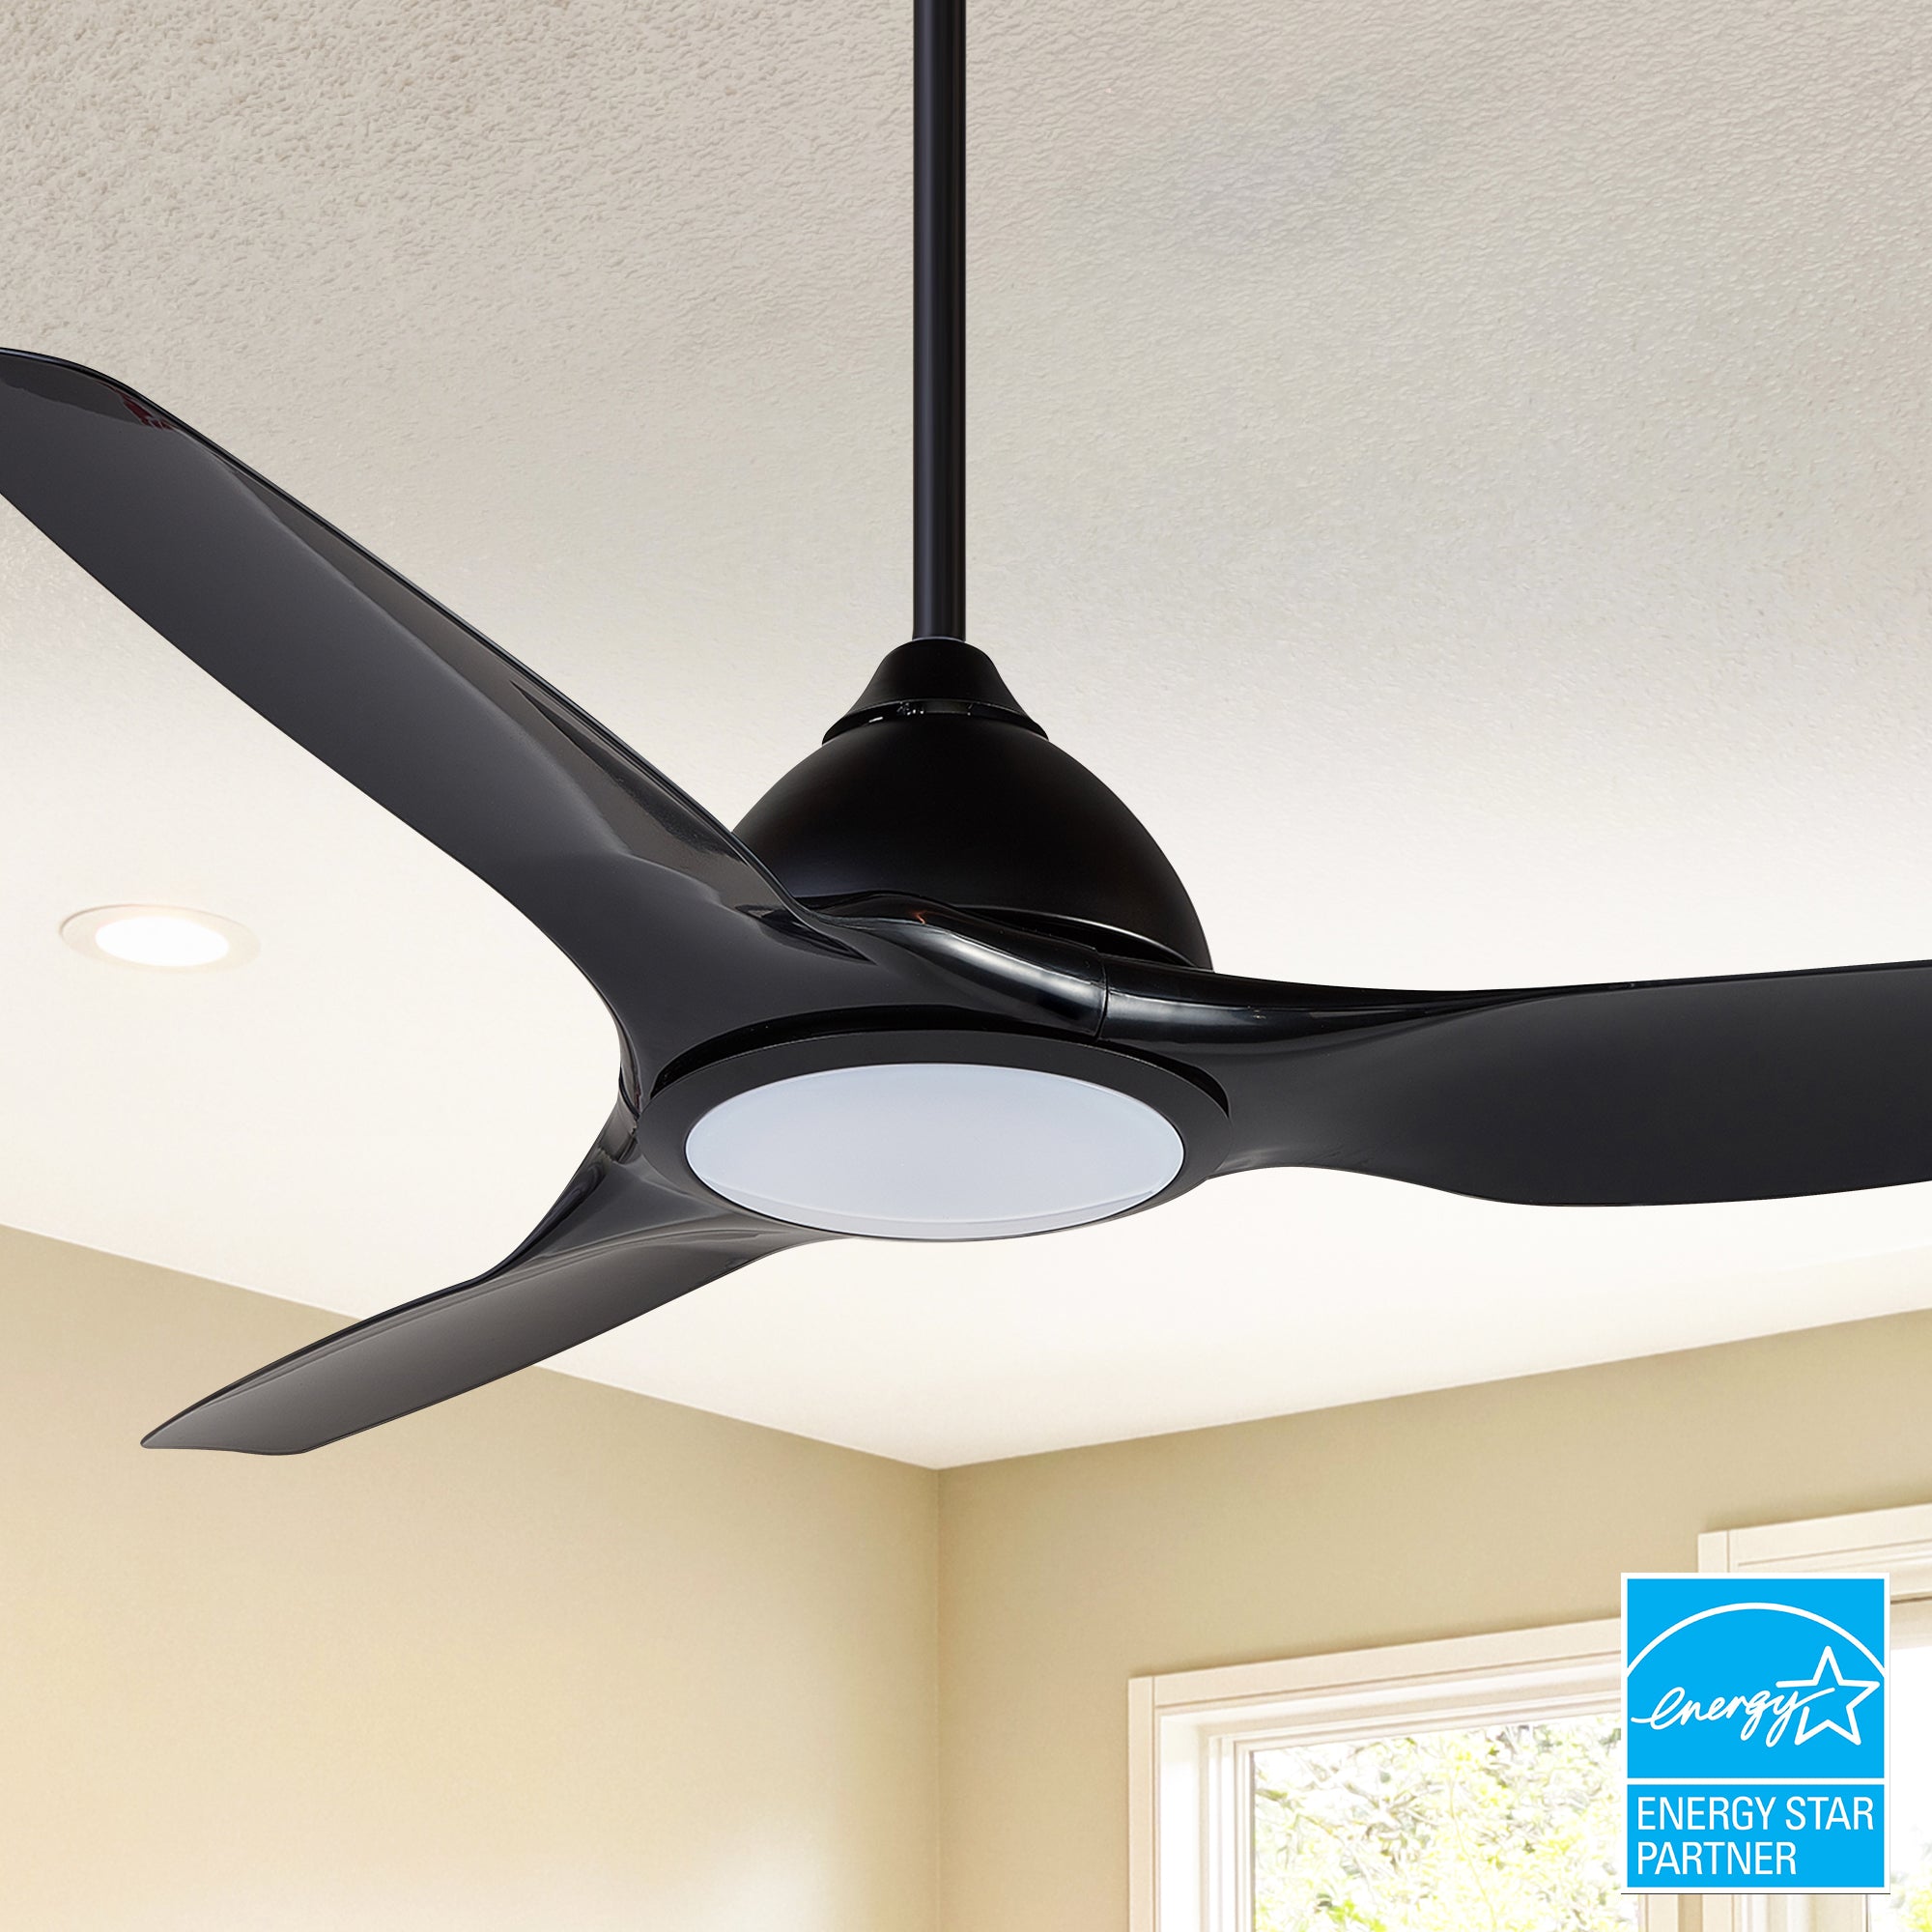 Smafan Cresta 52&#39;&#39; smart ceiling fan designs with Black finish, use ABS blades and has an integrated 4000K LED daylight. 